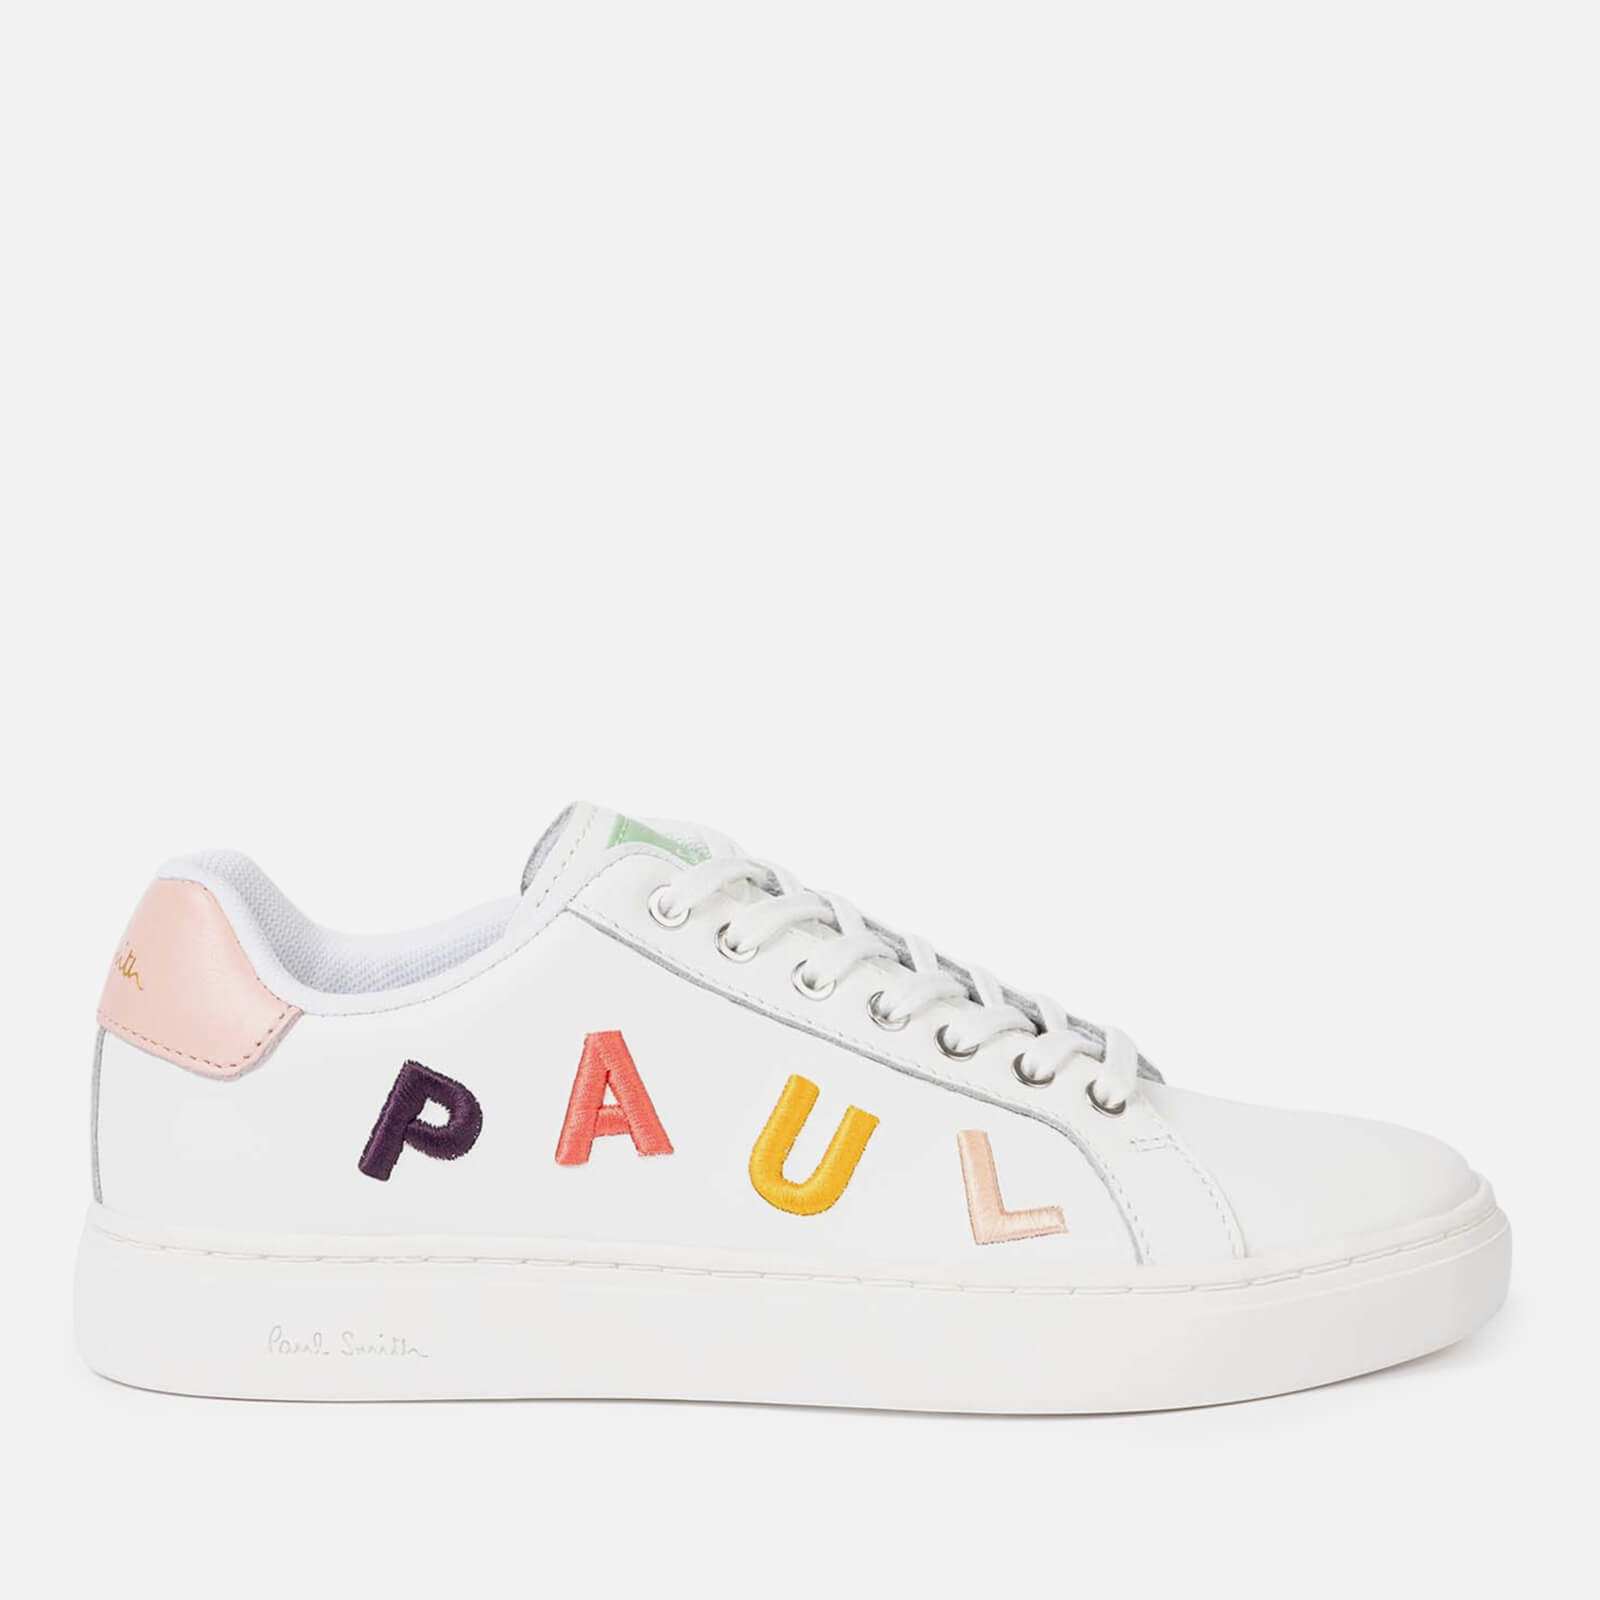 paul smith women's lapin letters leather trainers - uk 3